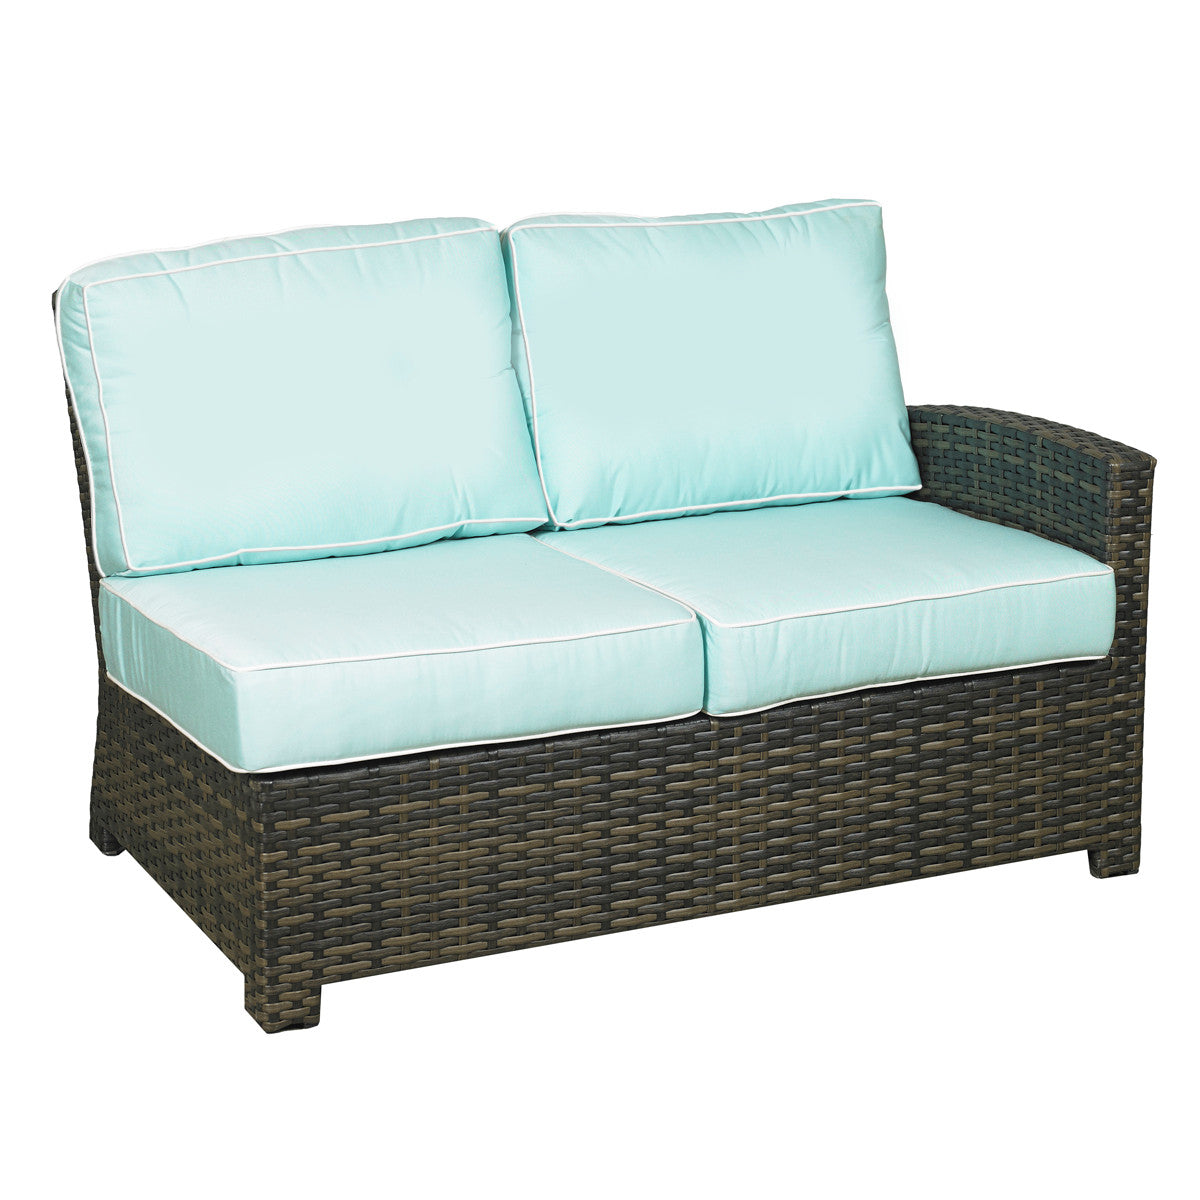 Forever Patio Brookside Wicker Sectional Right Arm Facing Loveseat